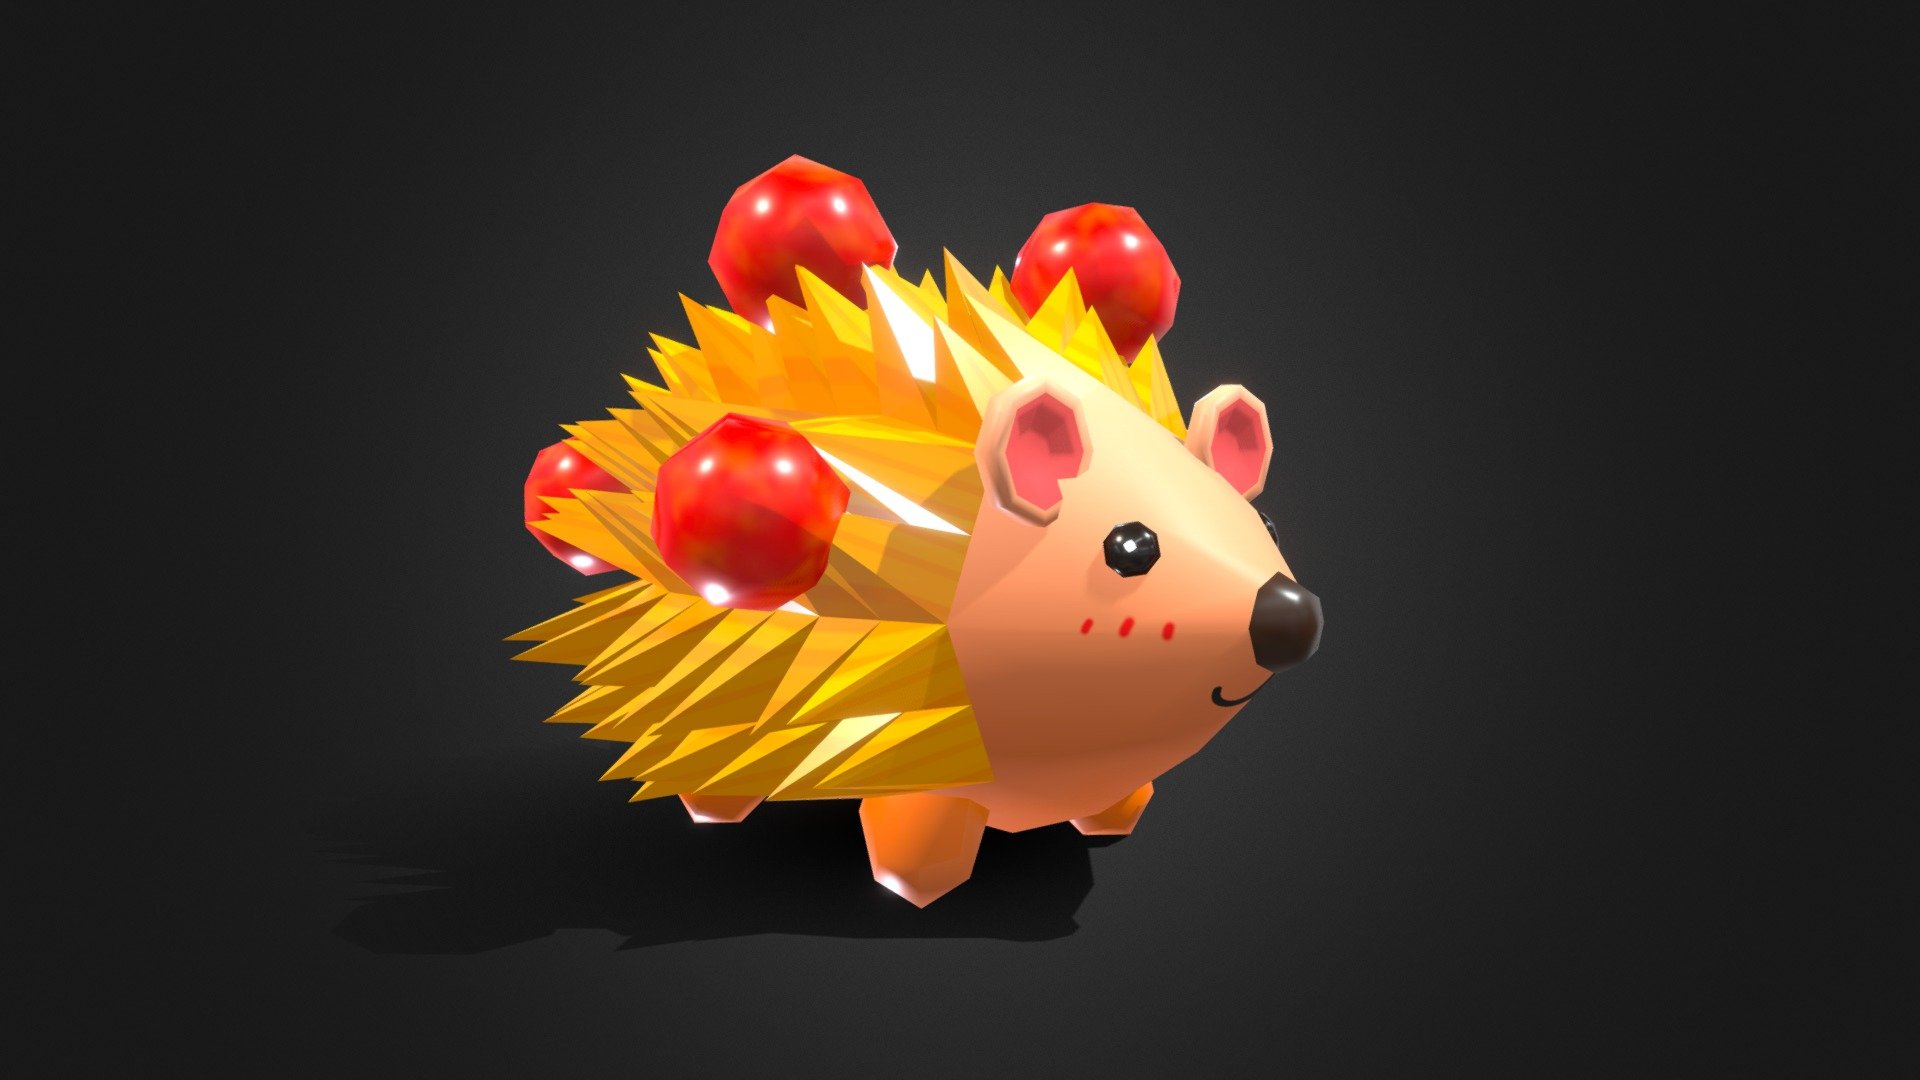 A low poly cartoon cute little hedgehog made with Blender,perfect for making Roblox games.

Its material consists of two textures,namely BaseColor and Roughness.

You can download it and immediately use it in the game you’re making 3d model